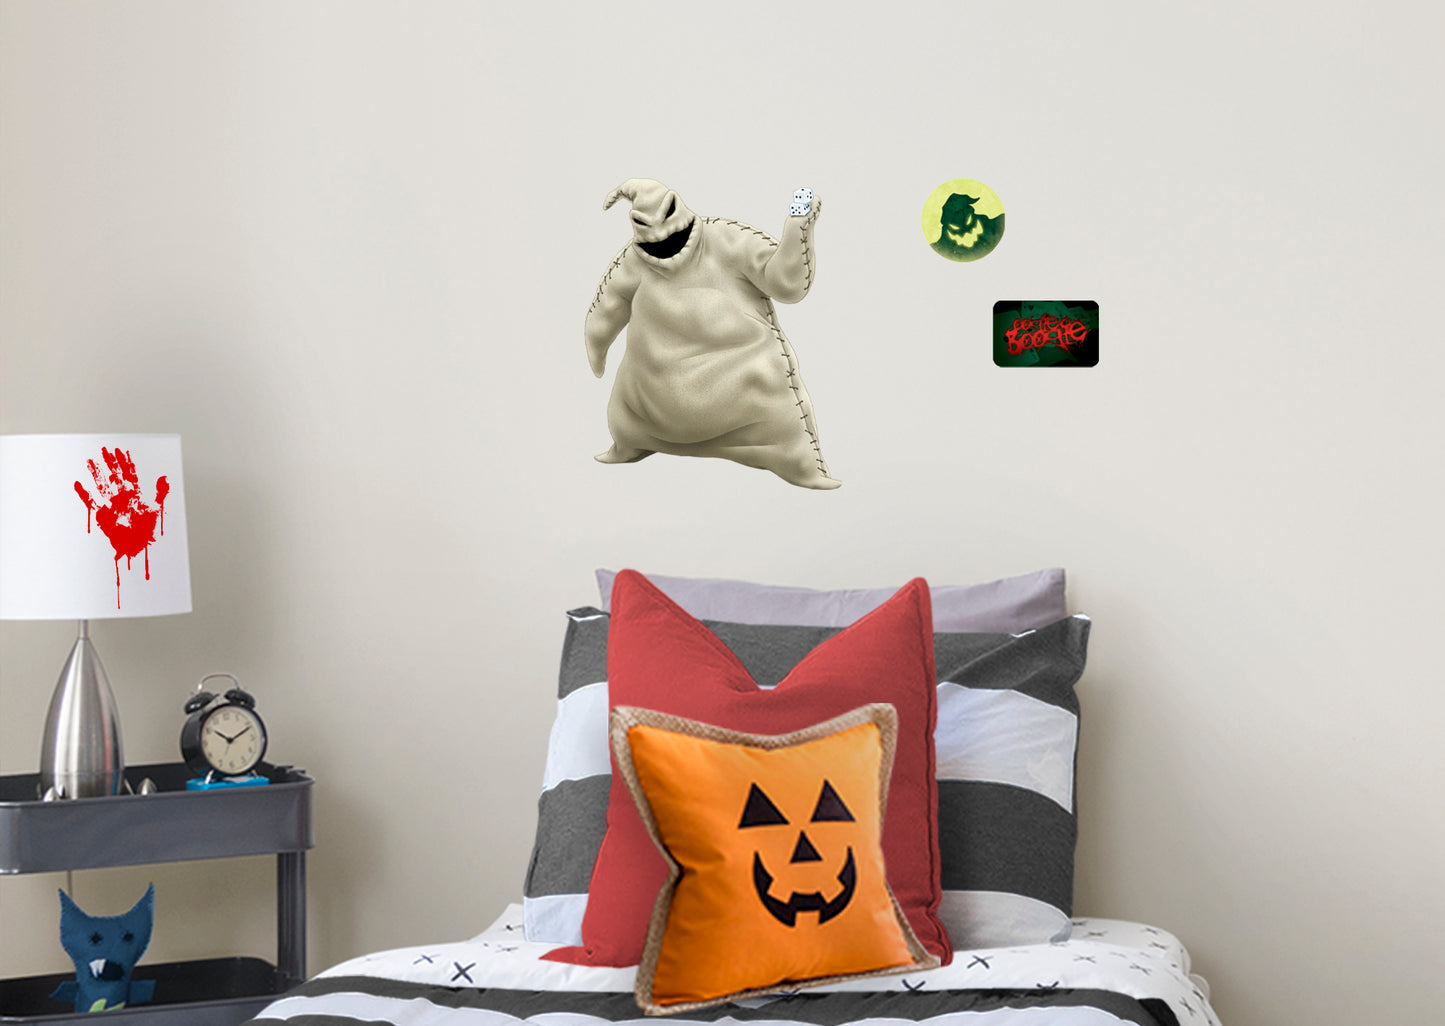 The Nightmare Before Christmas: Oogie Boogie RealBig        - Officially Licensed Disney Removable Wall   Adhesive Decal